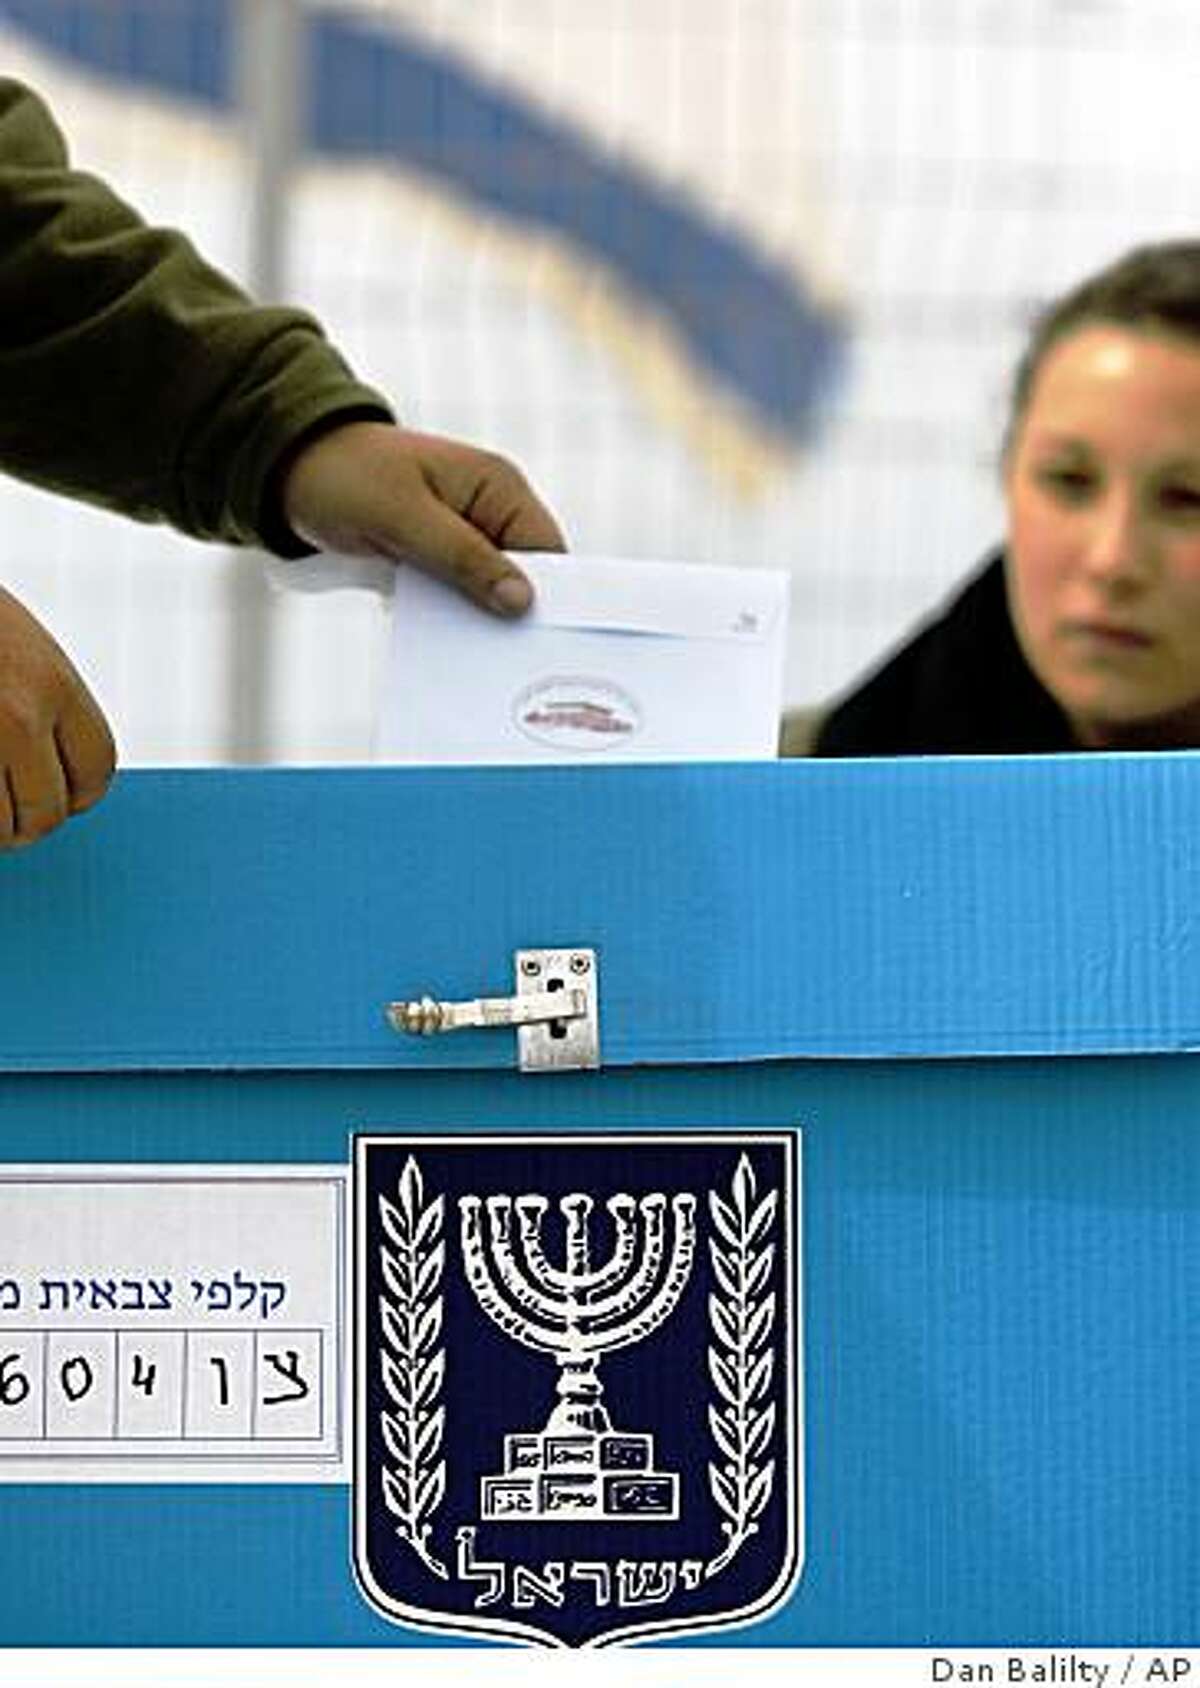 An Israeli soldier casts his ballot during an event organized by the Israeli media at a polling station at a military outpost on Mount Hermon in the Israeli controlled Golan Heights, Monday, Feb. 9, 2009. Many Israeli soldiers and police officers are voting in advance of Tuesday's polls. General elections in Israel are scheduled for Feb. 10, 2009, and pre-election polls appear to show Netanyahu with a lead over Foreign Minister and Kadima Party leader Tzipi Livni.(AP Photo/Dan Balilty)